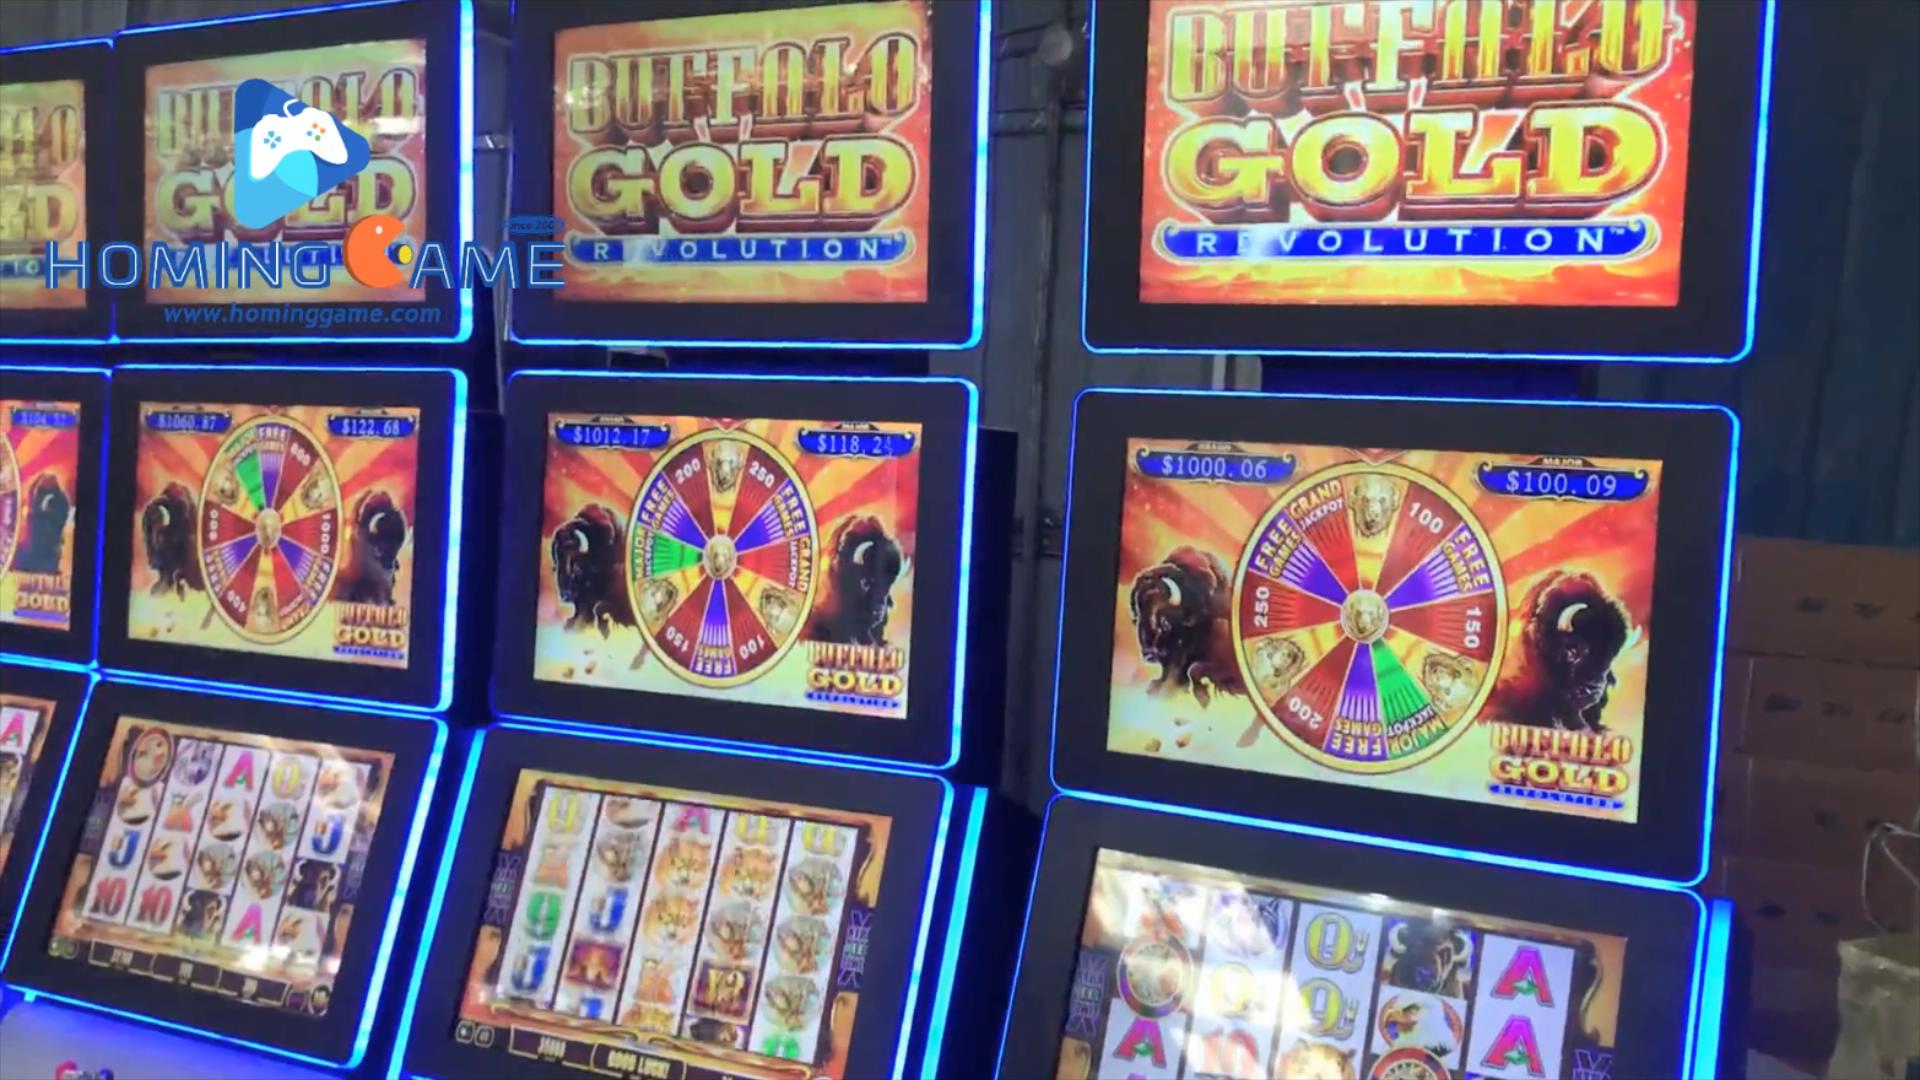 2021 Specialize in Manufacturing 43' Touch Fire Link slot game,Buffalo Gold slot game,fusion 4 slot game,Money Gold,Dragon Link,Panda link,golden master,high roller slot game,lighting slot game by HomingGame(Order Call Whatsapp:+8618688409495)<br /><br />
</span> </p><br />
<p style='text-align:center;'><br />
	<span style='font-size:24px;font-family:' times='' new='' roman';'=''><img src='https://source.gametube.hk/image/kindeditor/20210507/20210507115933_86285.jpg' alt='2021 USA Best Slot Table Game Machine Manufactuer By HomingGame Producing All kind of Slot Table,Fire link,Dragon link,Fusion 4,golden master,money gold,lighting ,panda link slot table game machine (Order Call Whatsapp:+8618688409495),43' touch curve monitor 8 in 1 fire link slot table game machine,8 in 1 fire link slot game machine,slot table game machine,43' touch screen fire link slot game machine,43' touch monitor fire link slot table game machine,43' curve touch monitor fire link slot gaming machine,dragon link slot game machine,panda link slot game machine,golden buffalo slot game machine,fusion 4 slot game machine,ultimate fire link,ultimate fire link slot game machine,ultimate fire link slot game,fire link slot game machine,fire link,ultimate fire link slot gaming machine,ultimate fire link slot table gaming machine,slot game,slot table game,slot gaming machine,game machine,arcade game machine,coin operated game machine,arcade game machine for sale,amsuement machine,entertainment game machine,family entertainment game machine,hominggame,www.gametube.hk,indoor game machine,casino,gambling machine,electrical game machine,slot,slot game machine for sale,slot table for sale,simulator game machine,video game machine,video game,video game machine for sale,hominggame fire link slot game,slot gaming